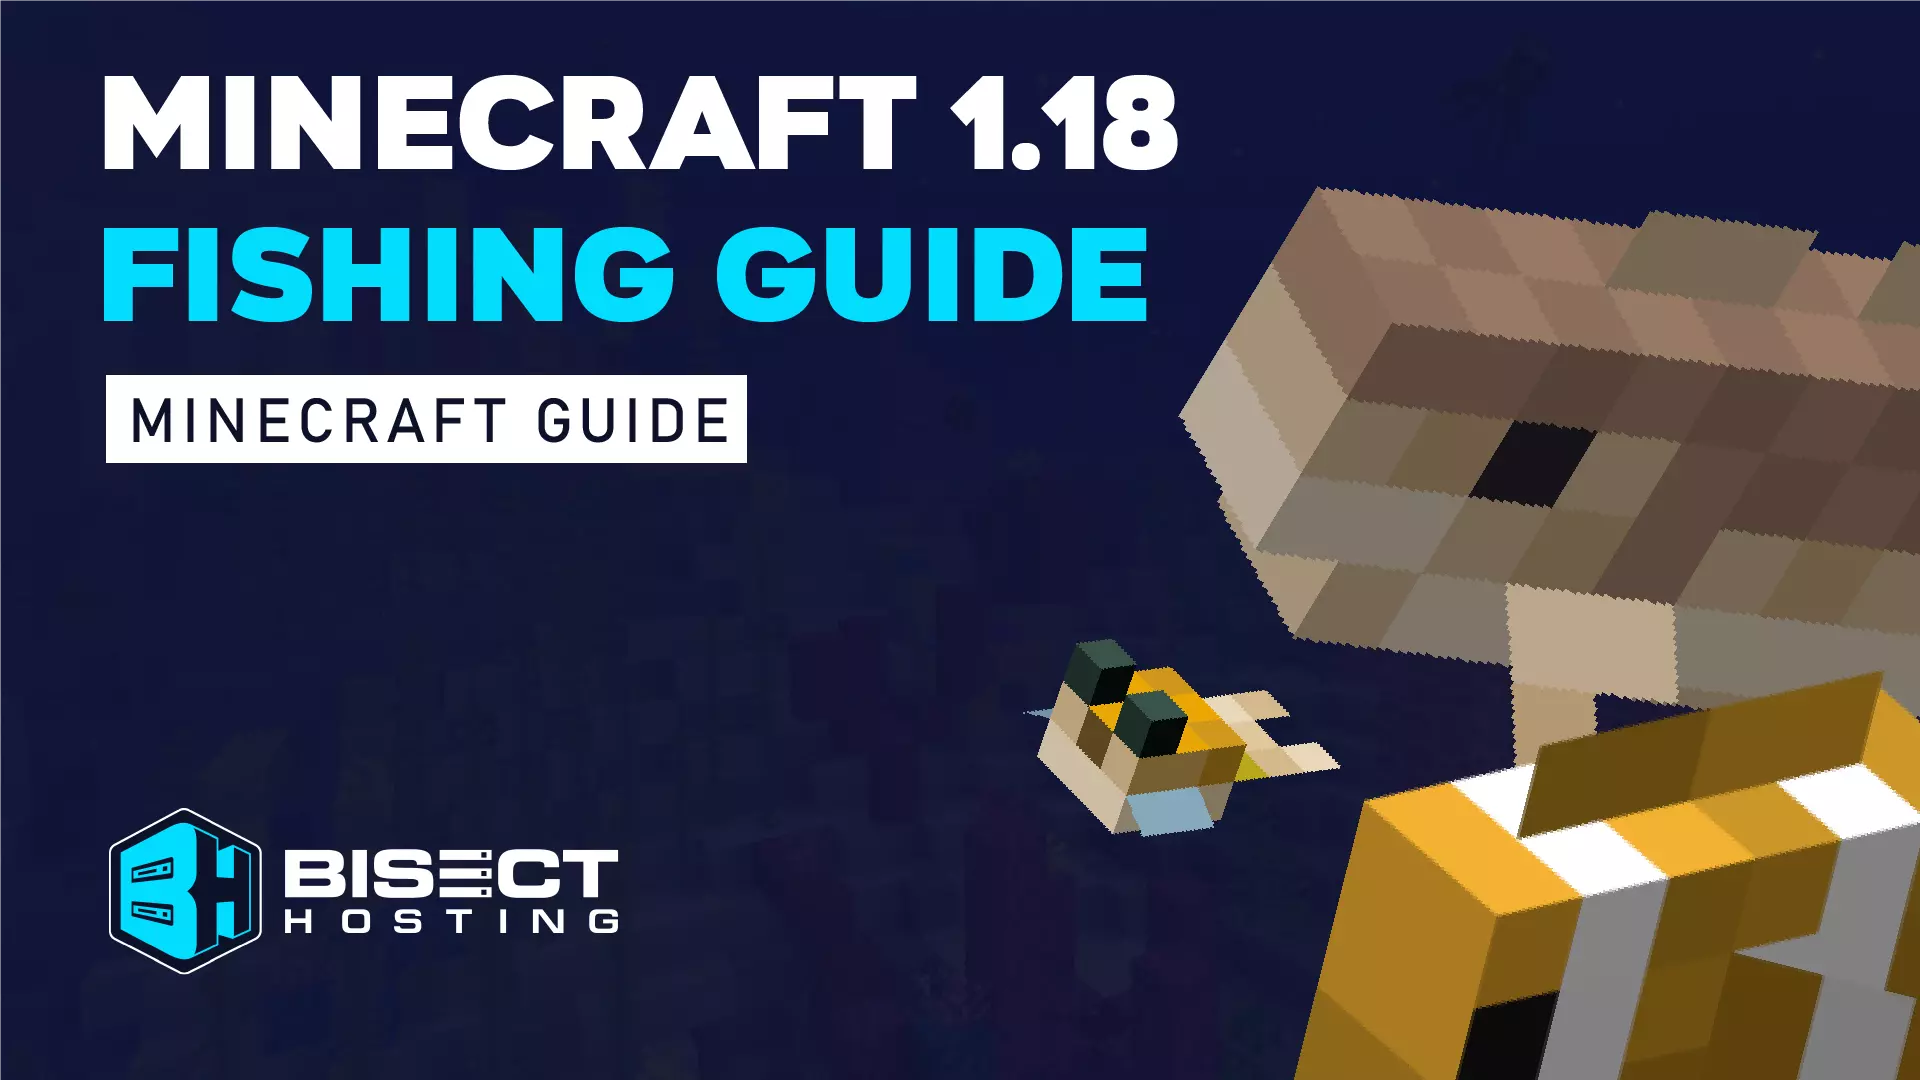 Minecraft 1.18 Fishing Guide